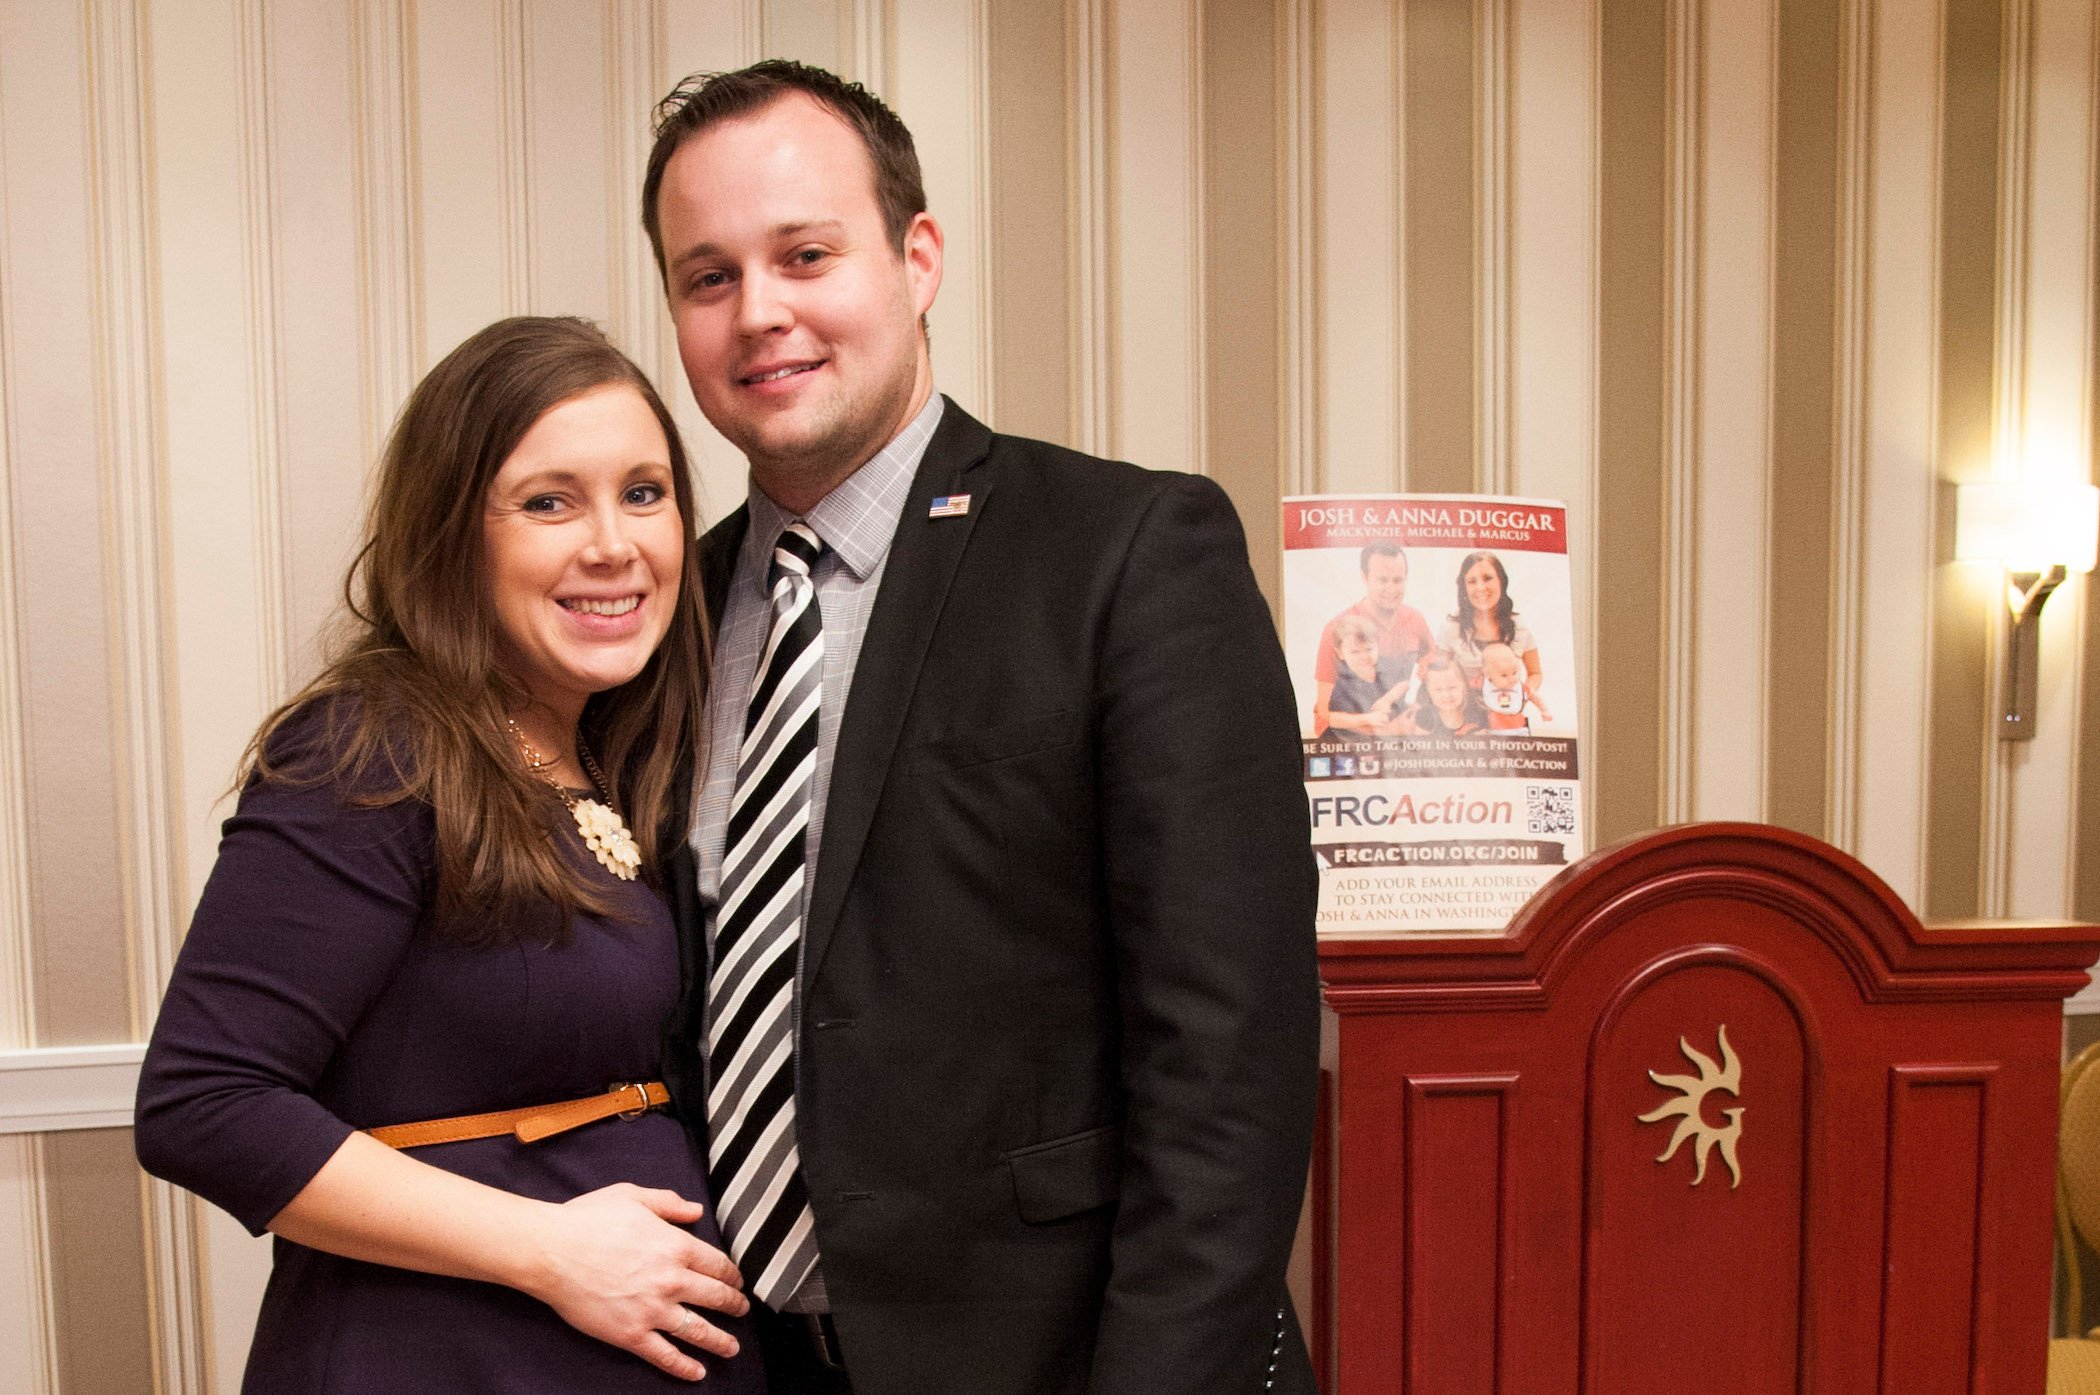 Josh Duggar of the Duggar family and Josh Duggar's wife, Anna Duggar, smiling and posing together. The latest Josh Duggar news shows his case was not dismissed in September 2021. 